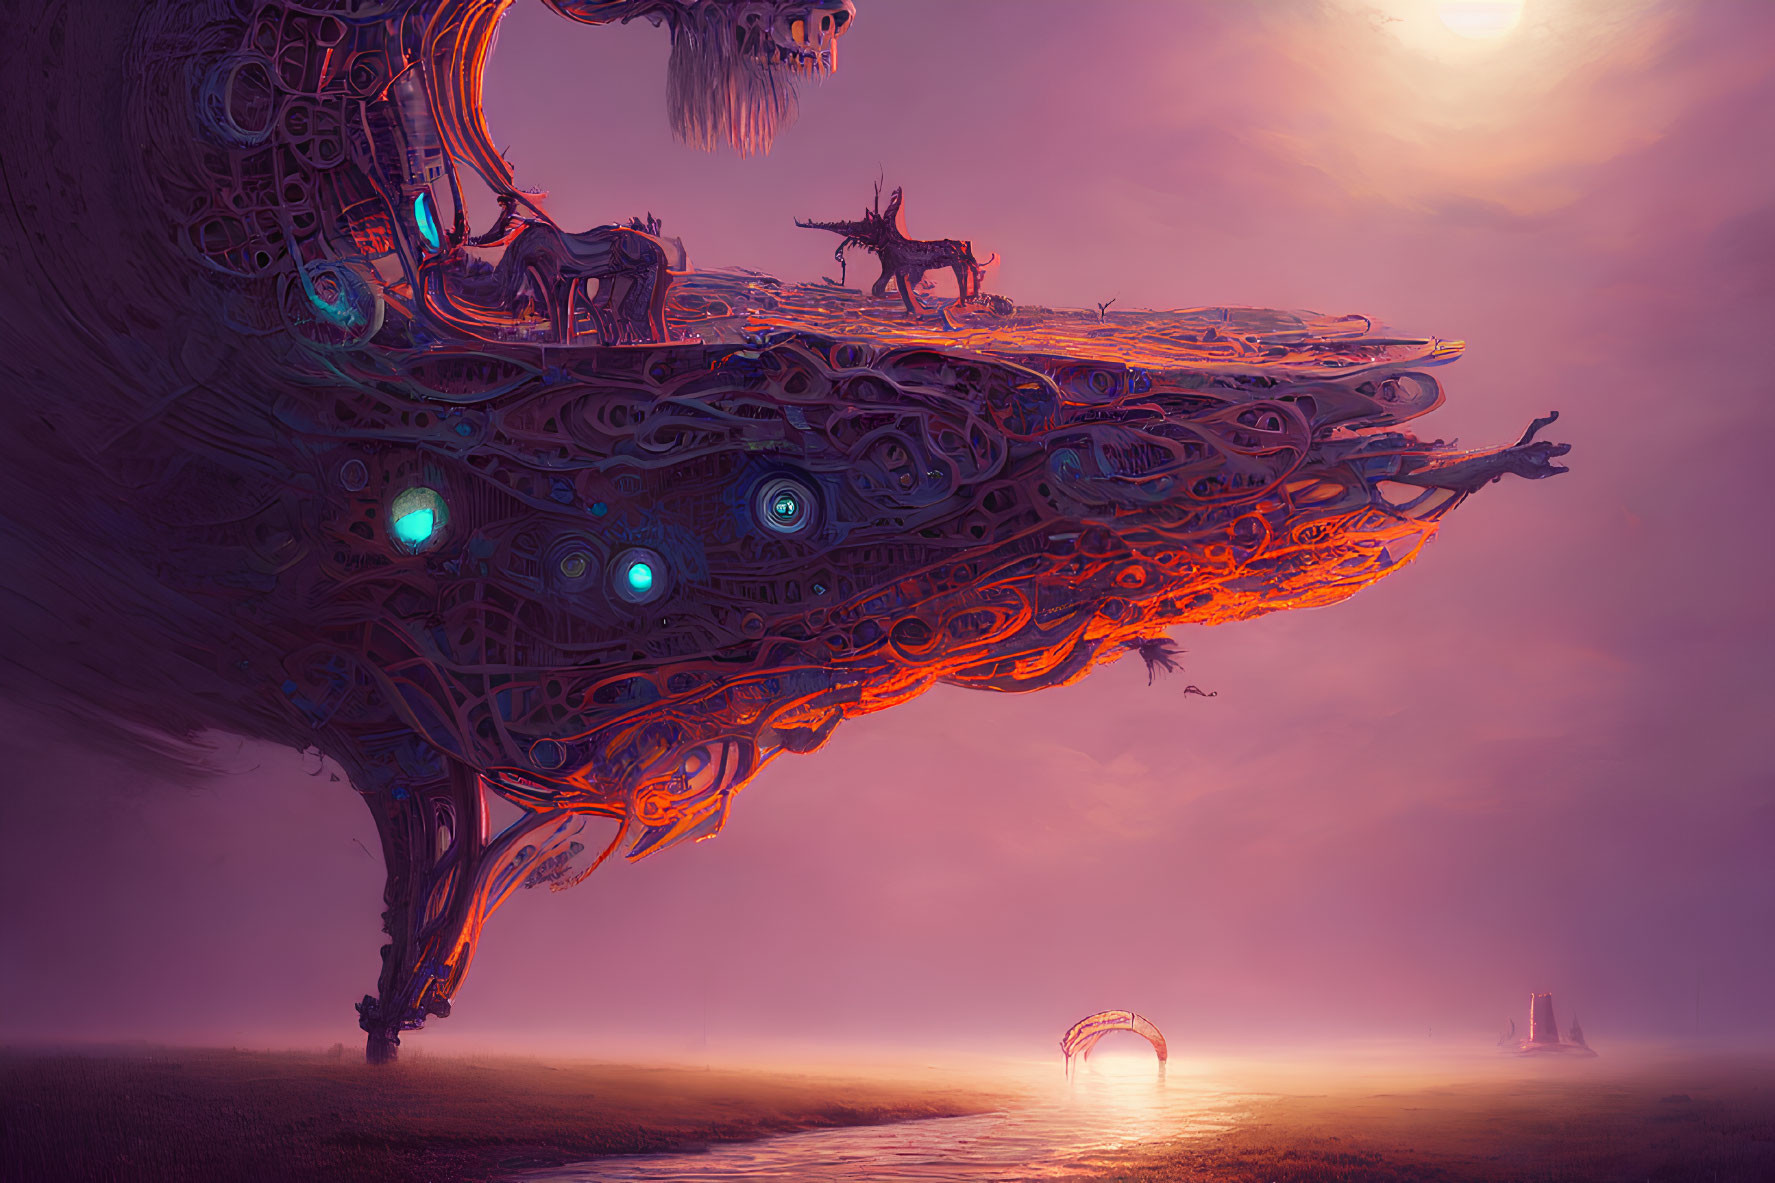 Surreal landscape with floating structure, glowing orbs, deer, and purple-hued background